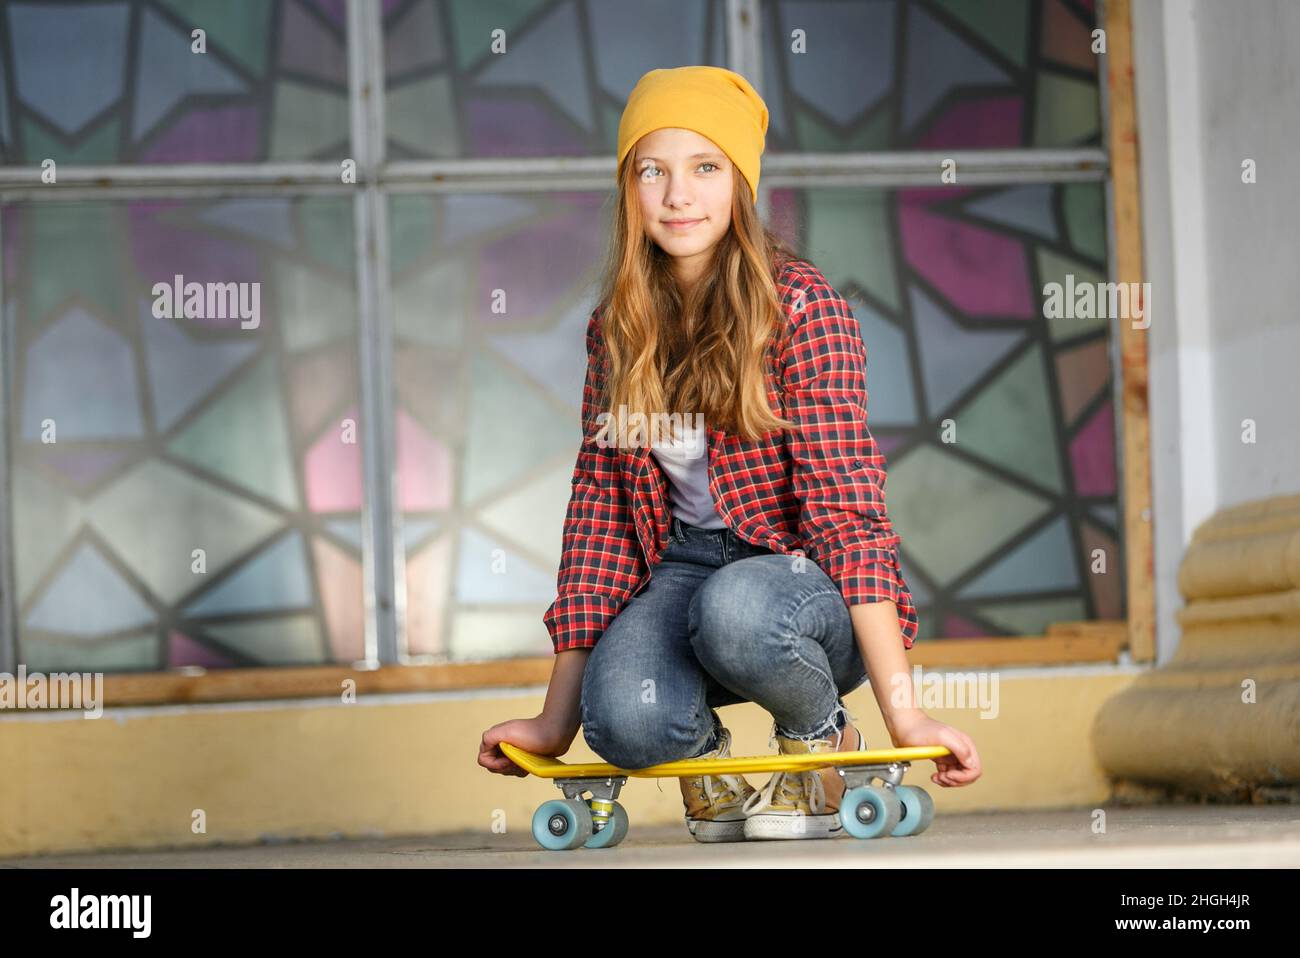 Lifestyle horizontal outdoor portrait of young smiling teenage girl  with a yellow skateboard wearing yellow hat and red plaid shirt Stock Photo